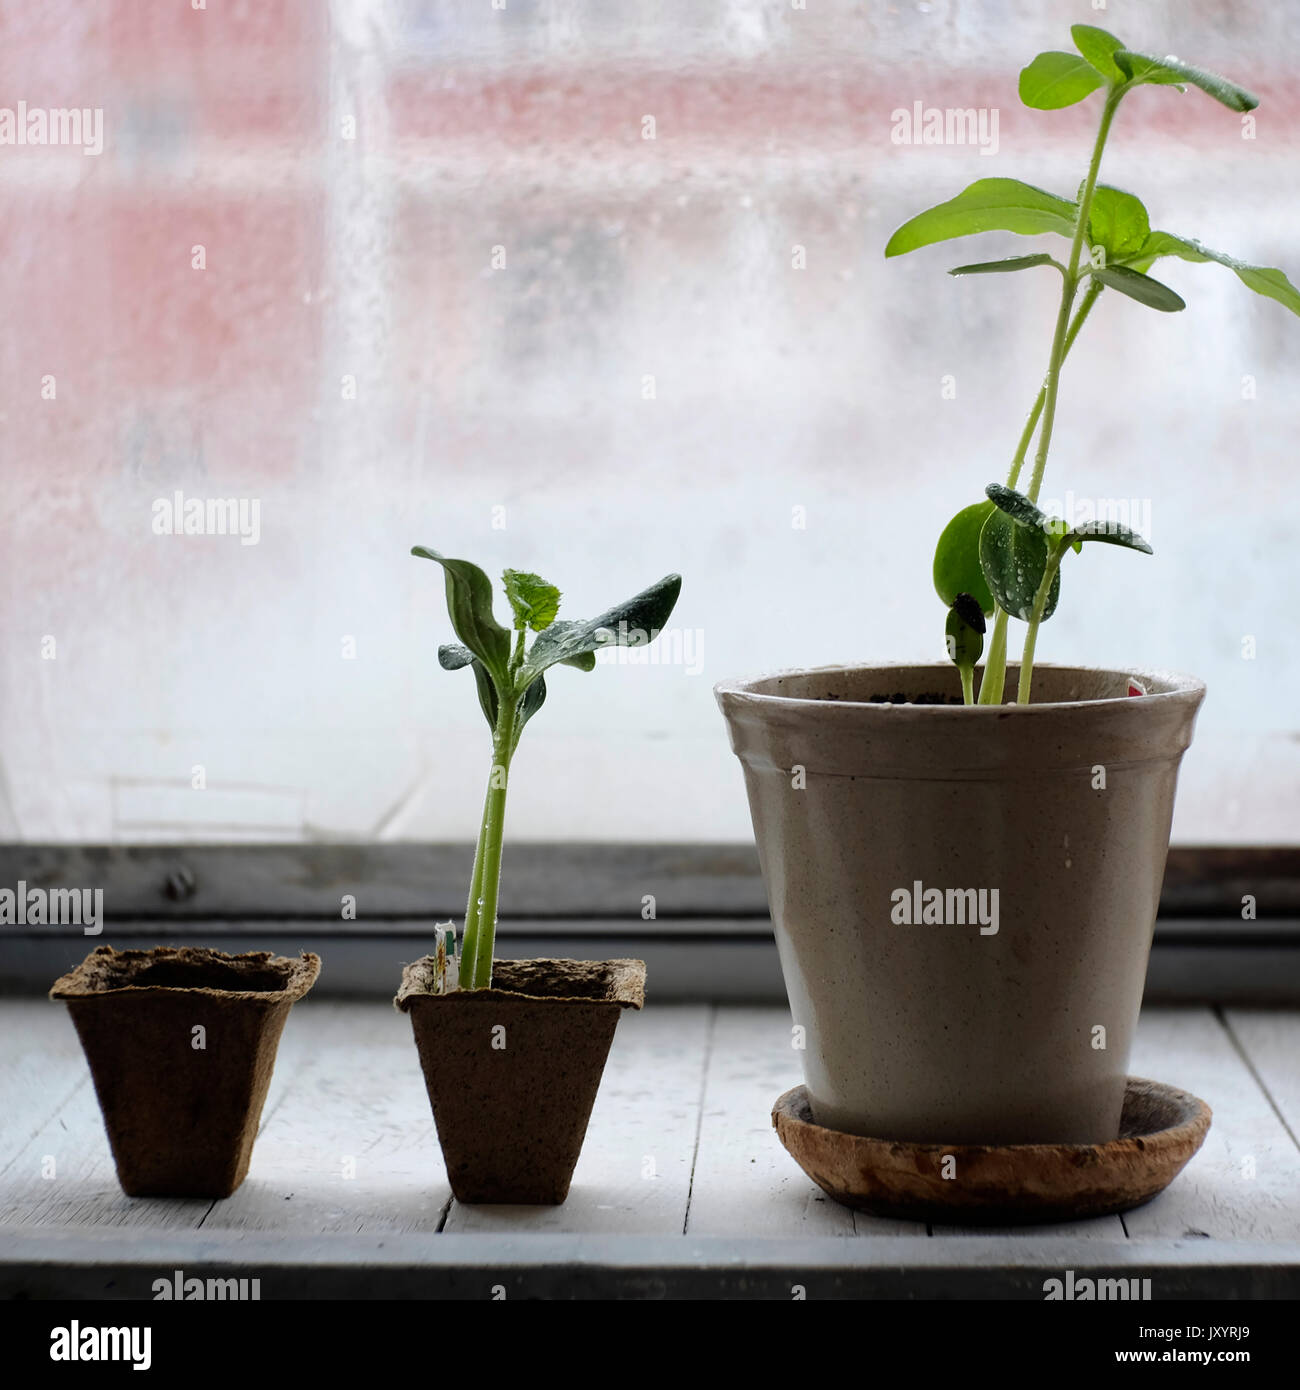 Three potted plants in order of growth on windowsill Stock Photo